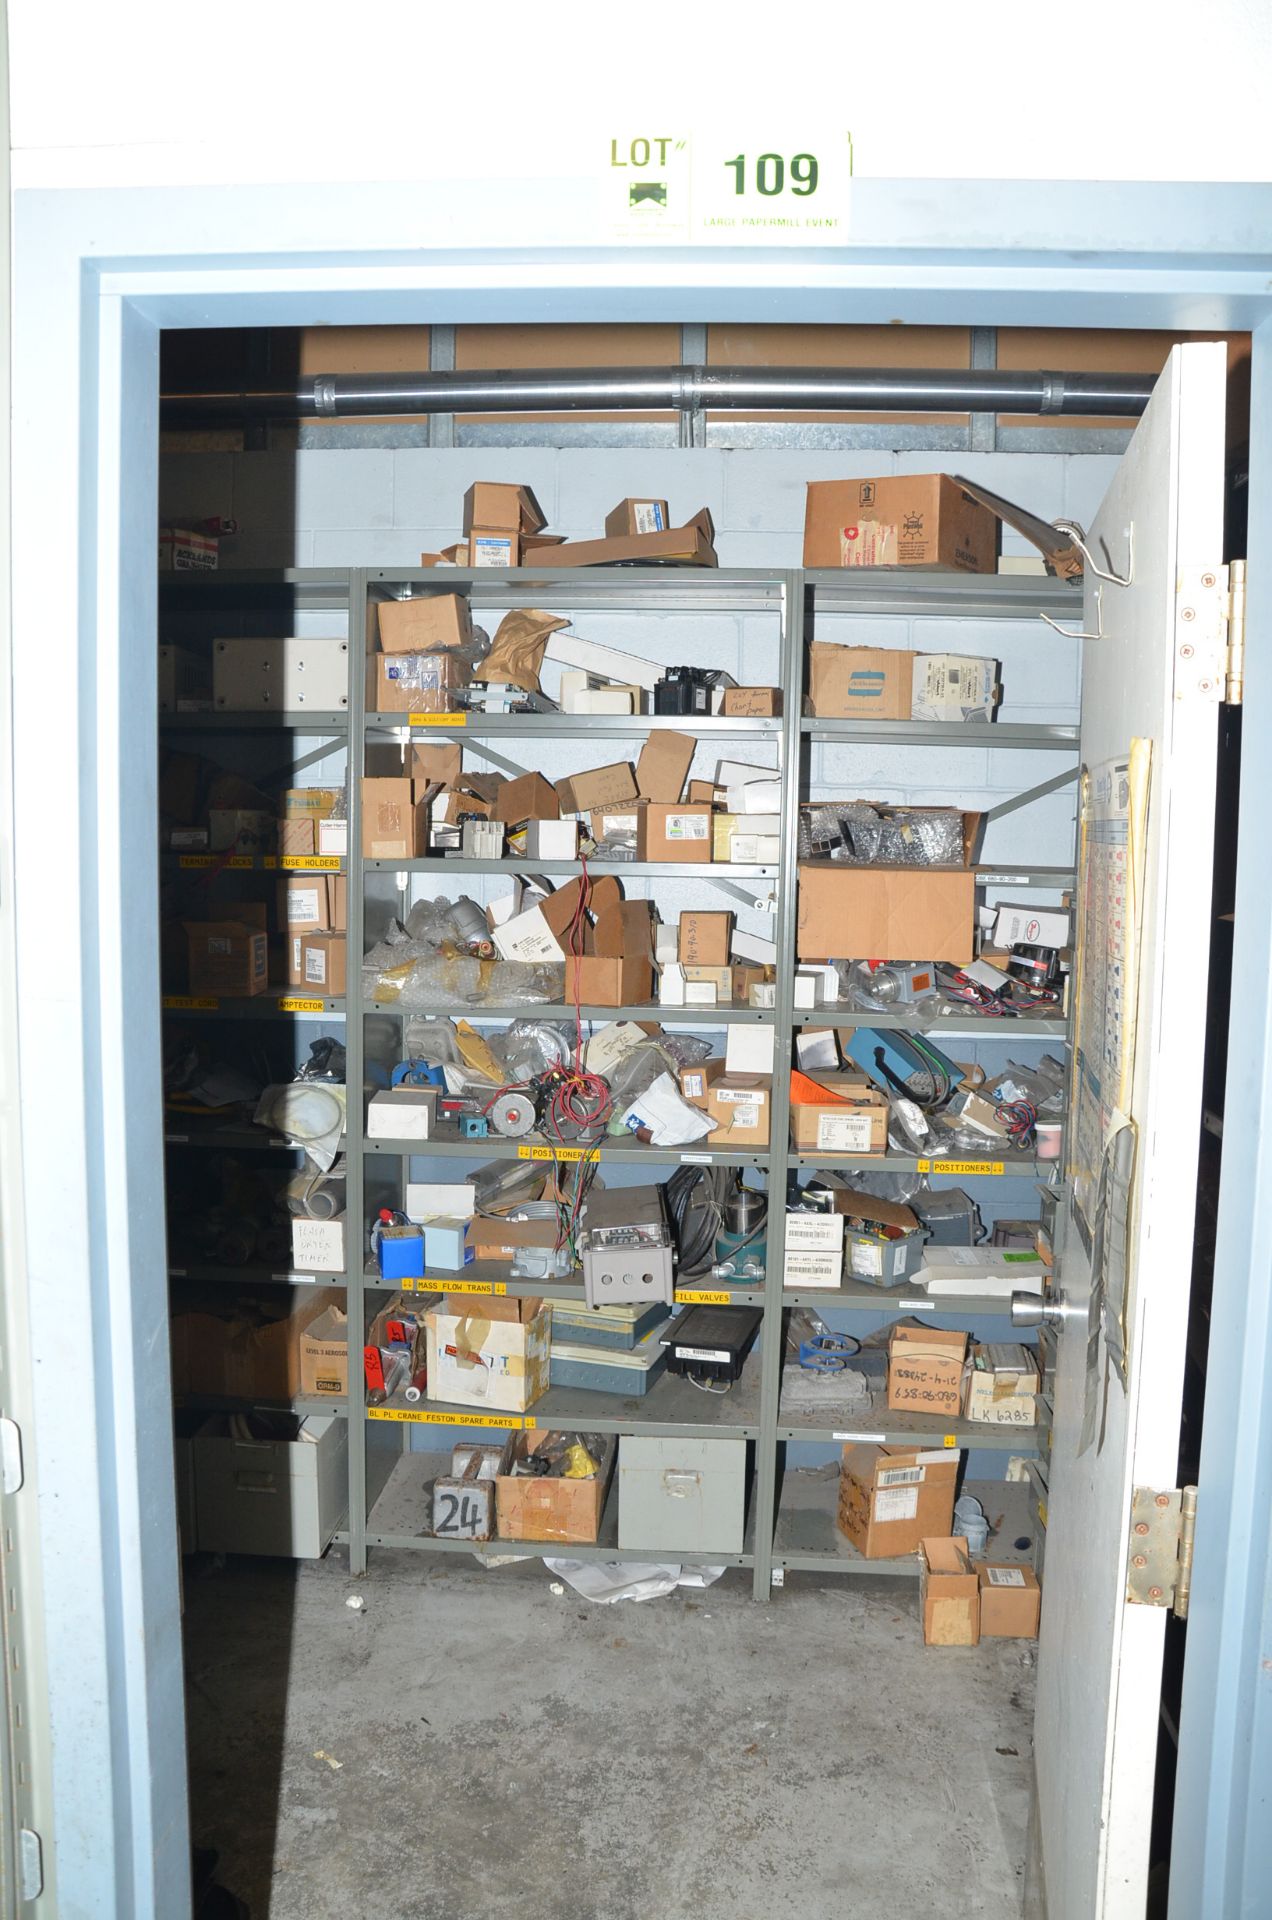 LOT/ CONTENTS OF ROOM CONSISING OF SHELVING WITH ELECTRICAL COMPONENTS AND PARTS [RIGGING FEES FOR